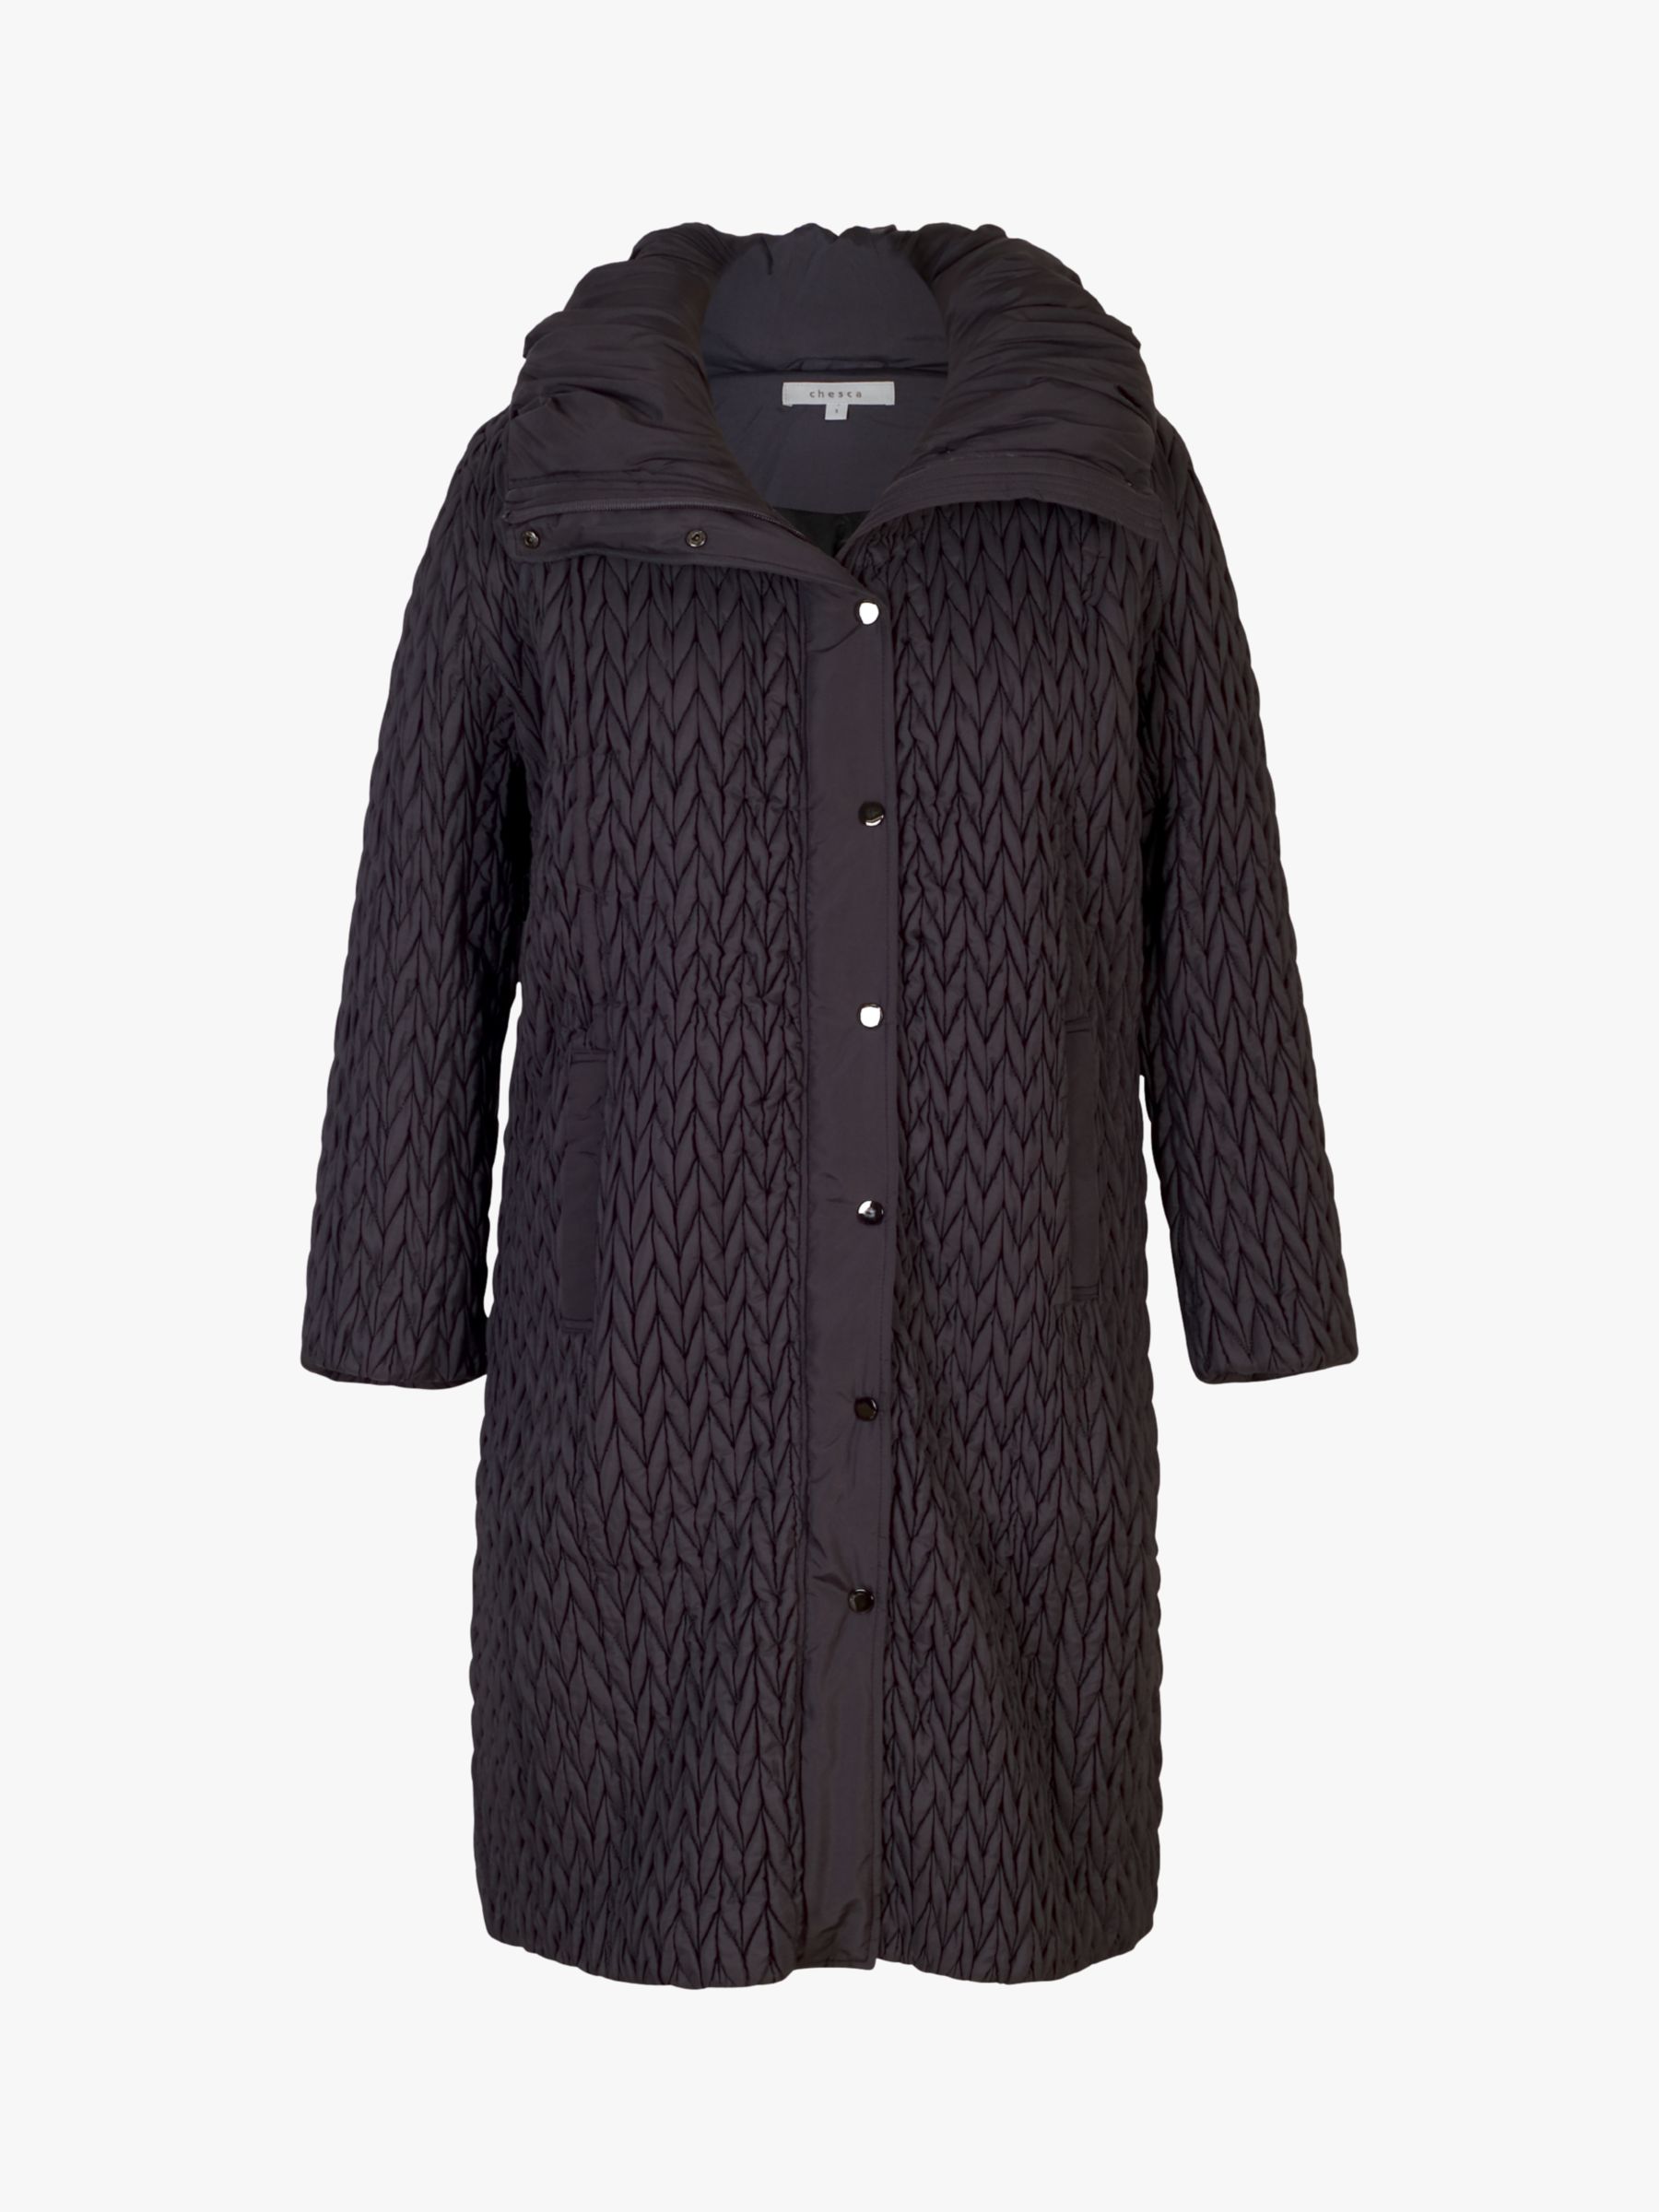 Chesca Cable Quilted Long Coat, Dark Amethyst at John Lewis & Partners